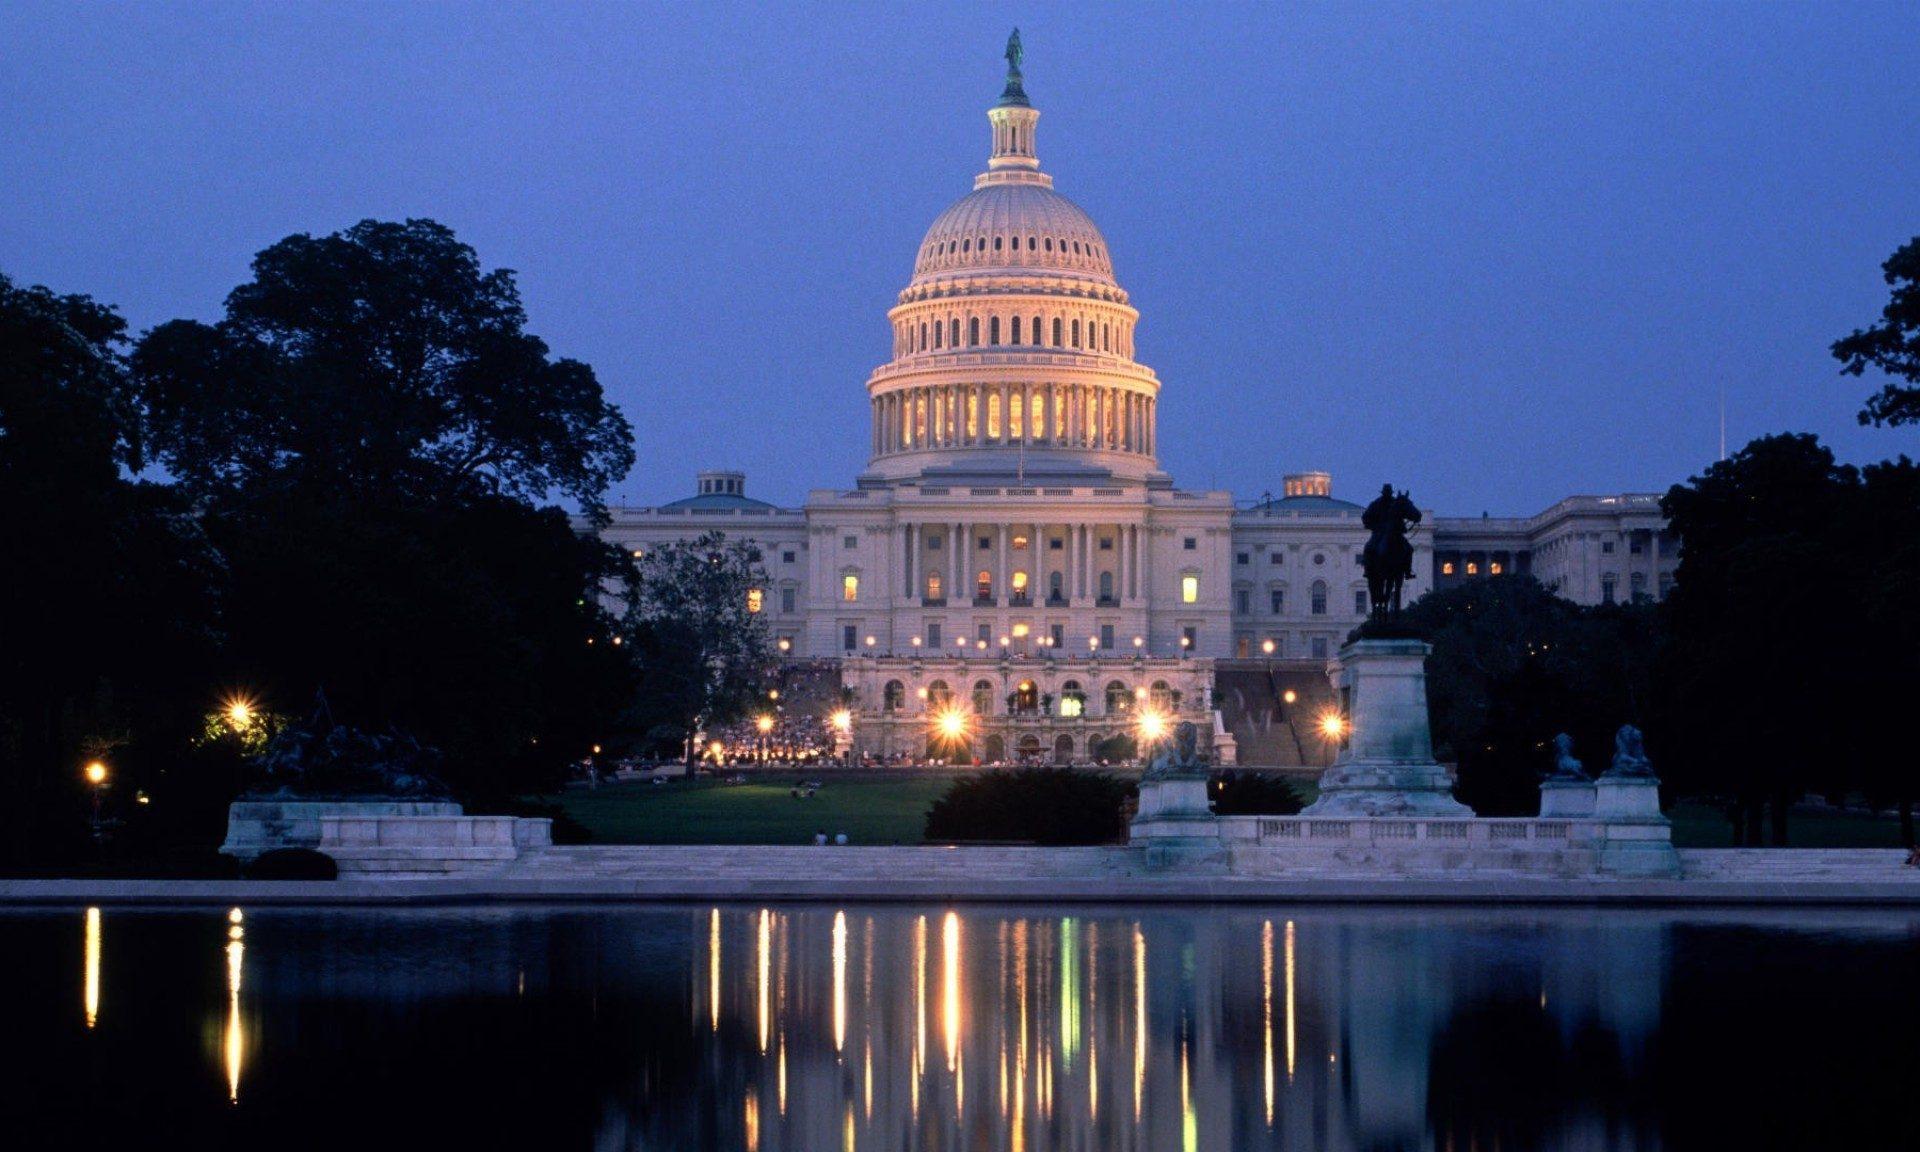 Best Evening Time Wallpaper Of The United States Capitol Building